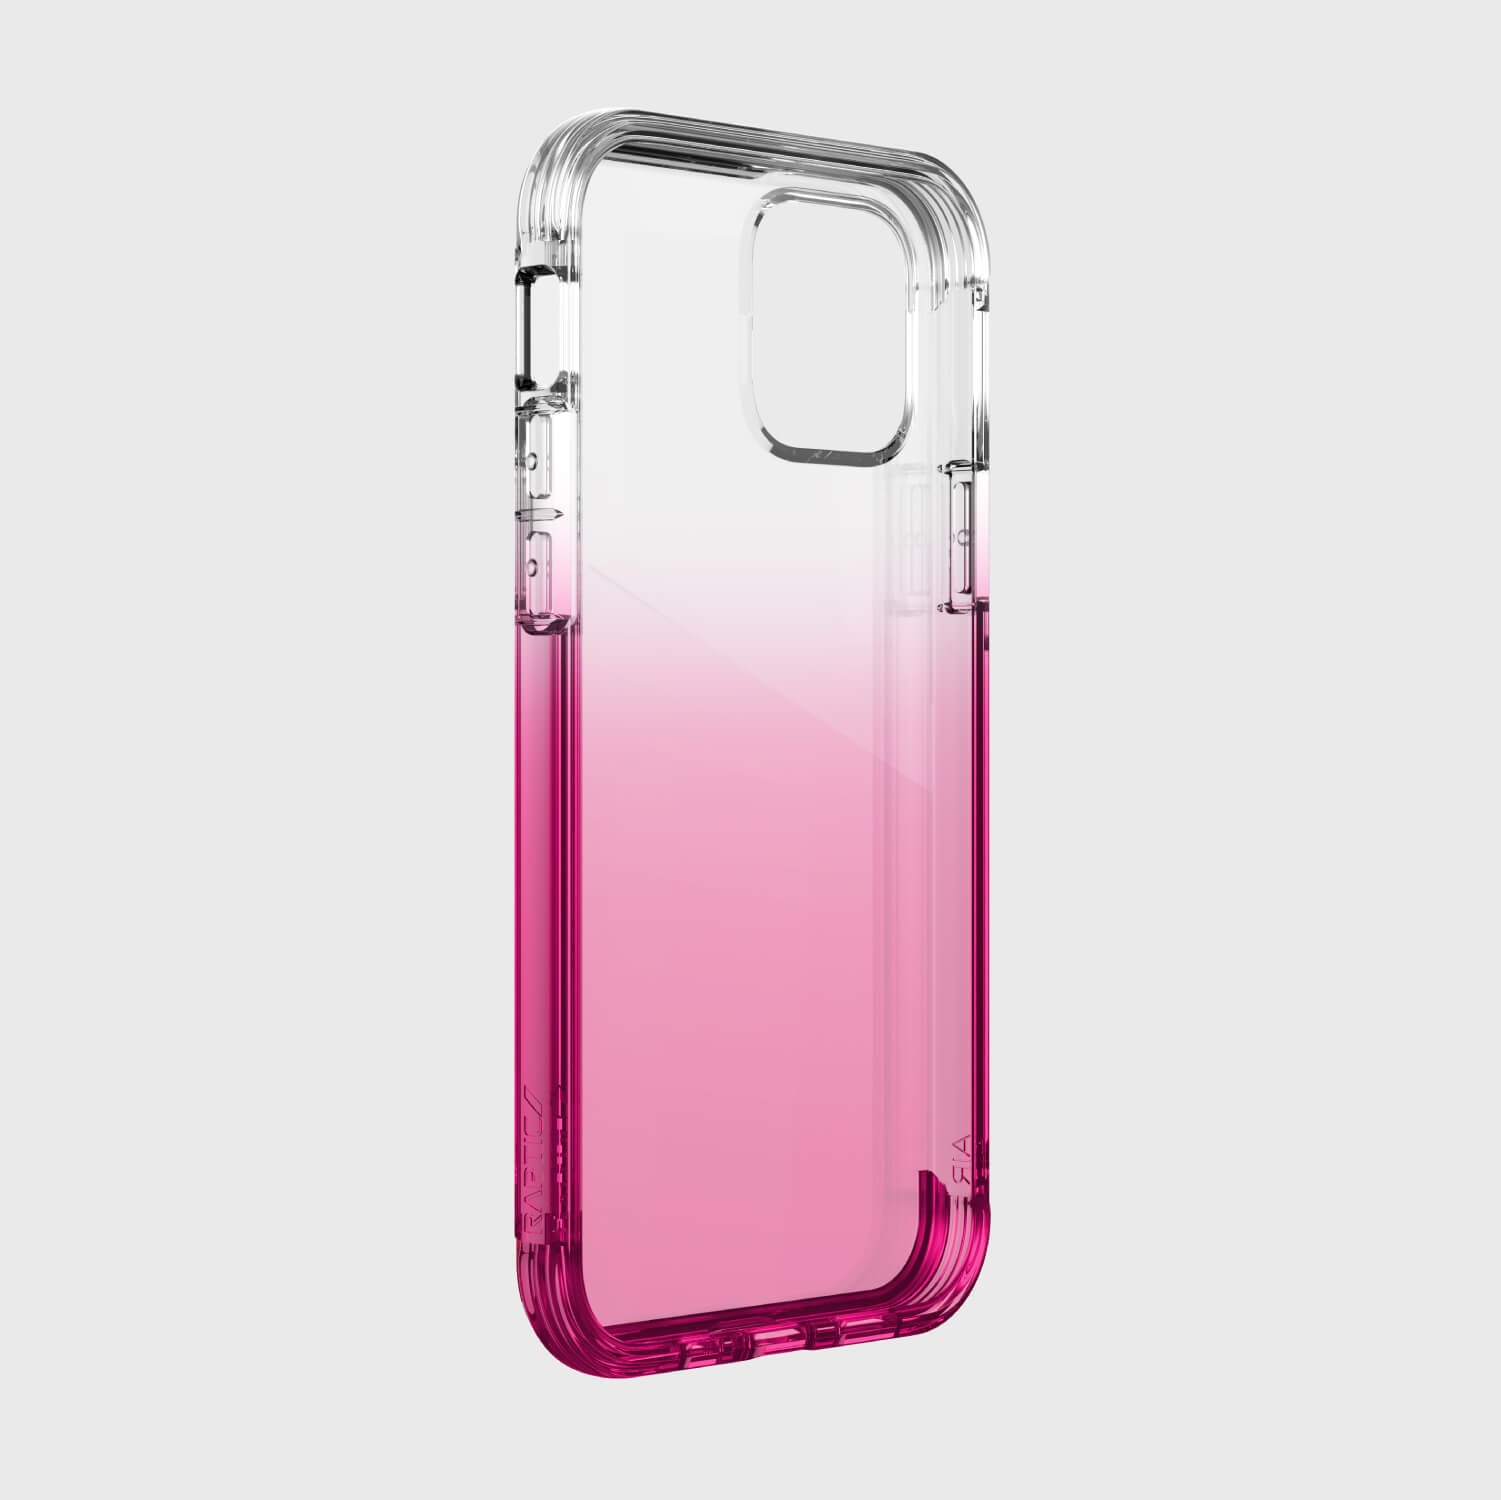 A pink and clear iPhone 12 Pro Max Case - AIR by Raptic with Wireless Charging Compatibility.